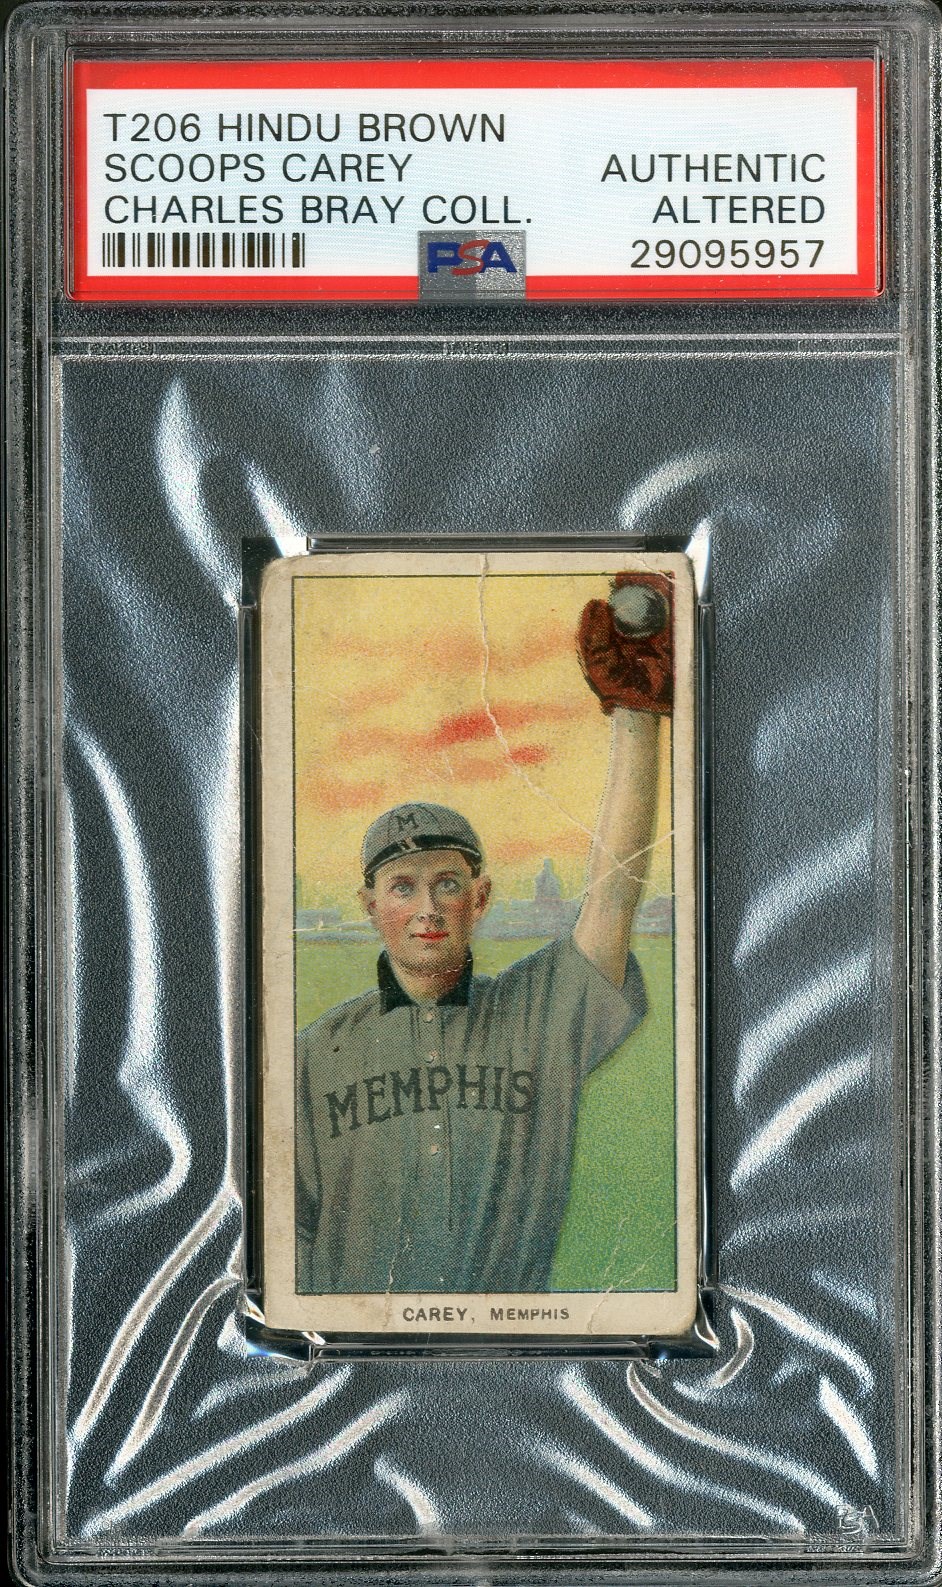 - T206 Scoops Carey - Rare Southern Leaguer with Hindu Brown Back - The Charles Bray Collection